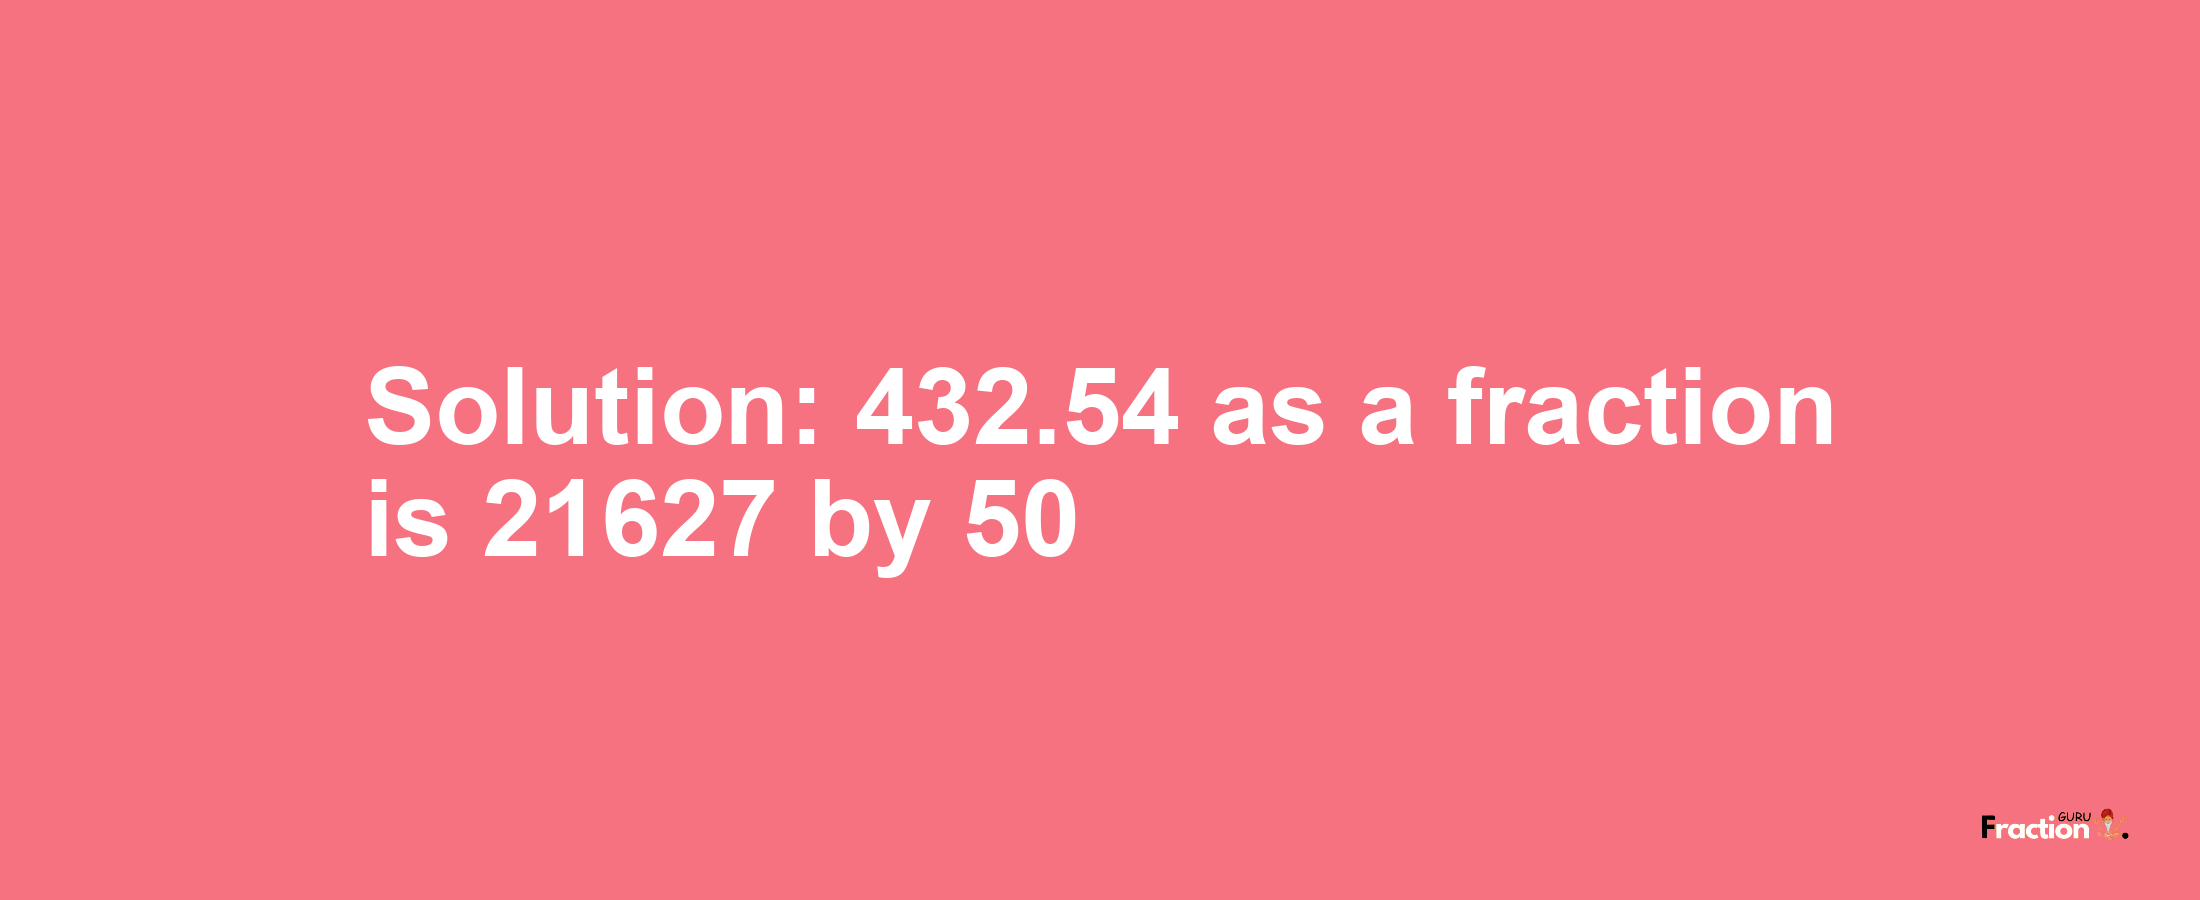 Solution:432.54 as a fraction is 21627/50